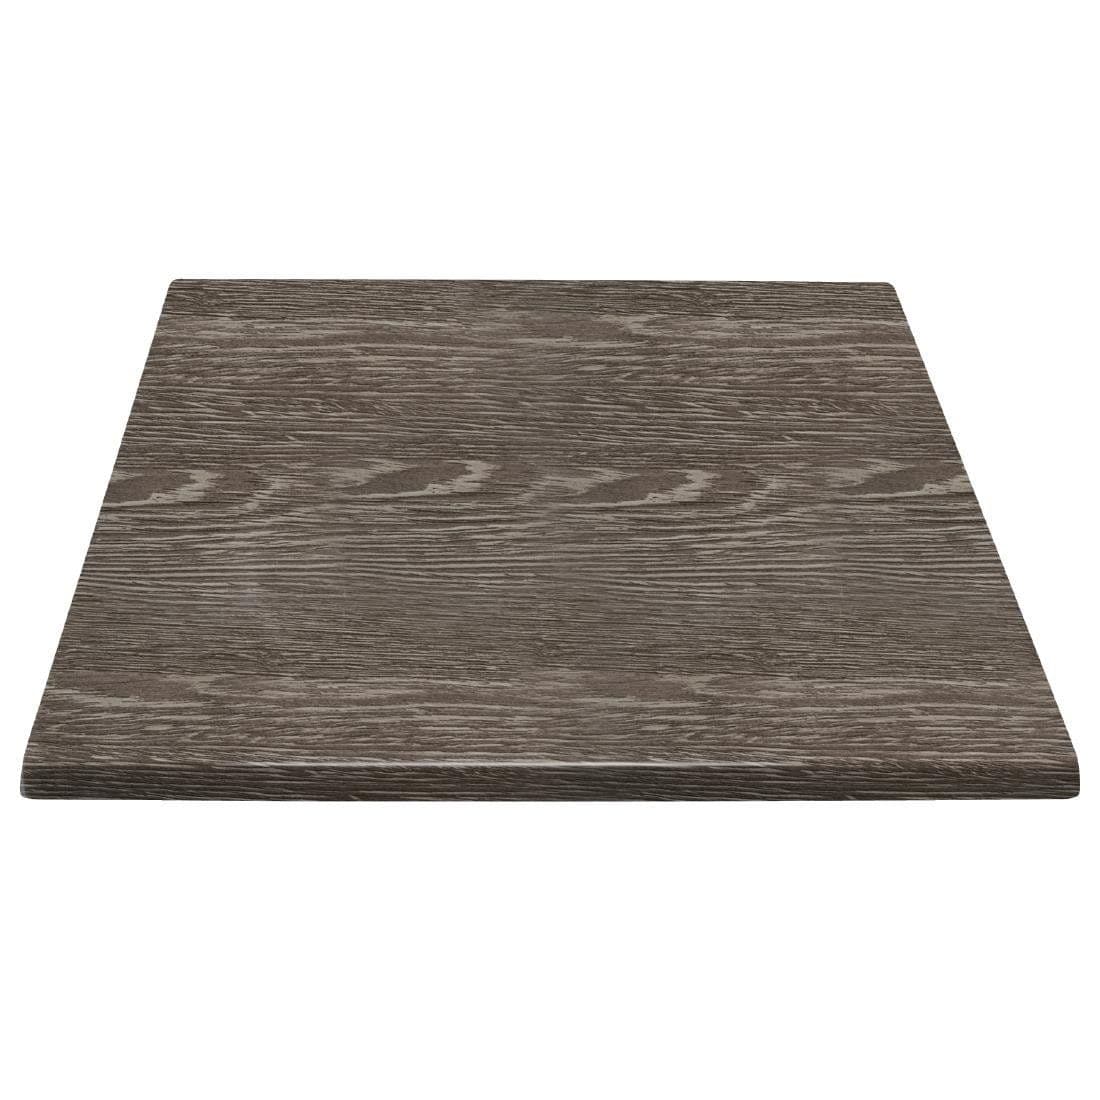 Bolero Pre-drilled Square Table Top Wenge Grain 700mm JD Catering Equipment Solutions Ltd